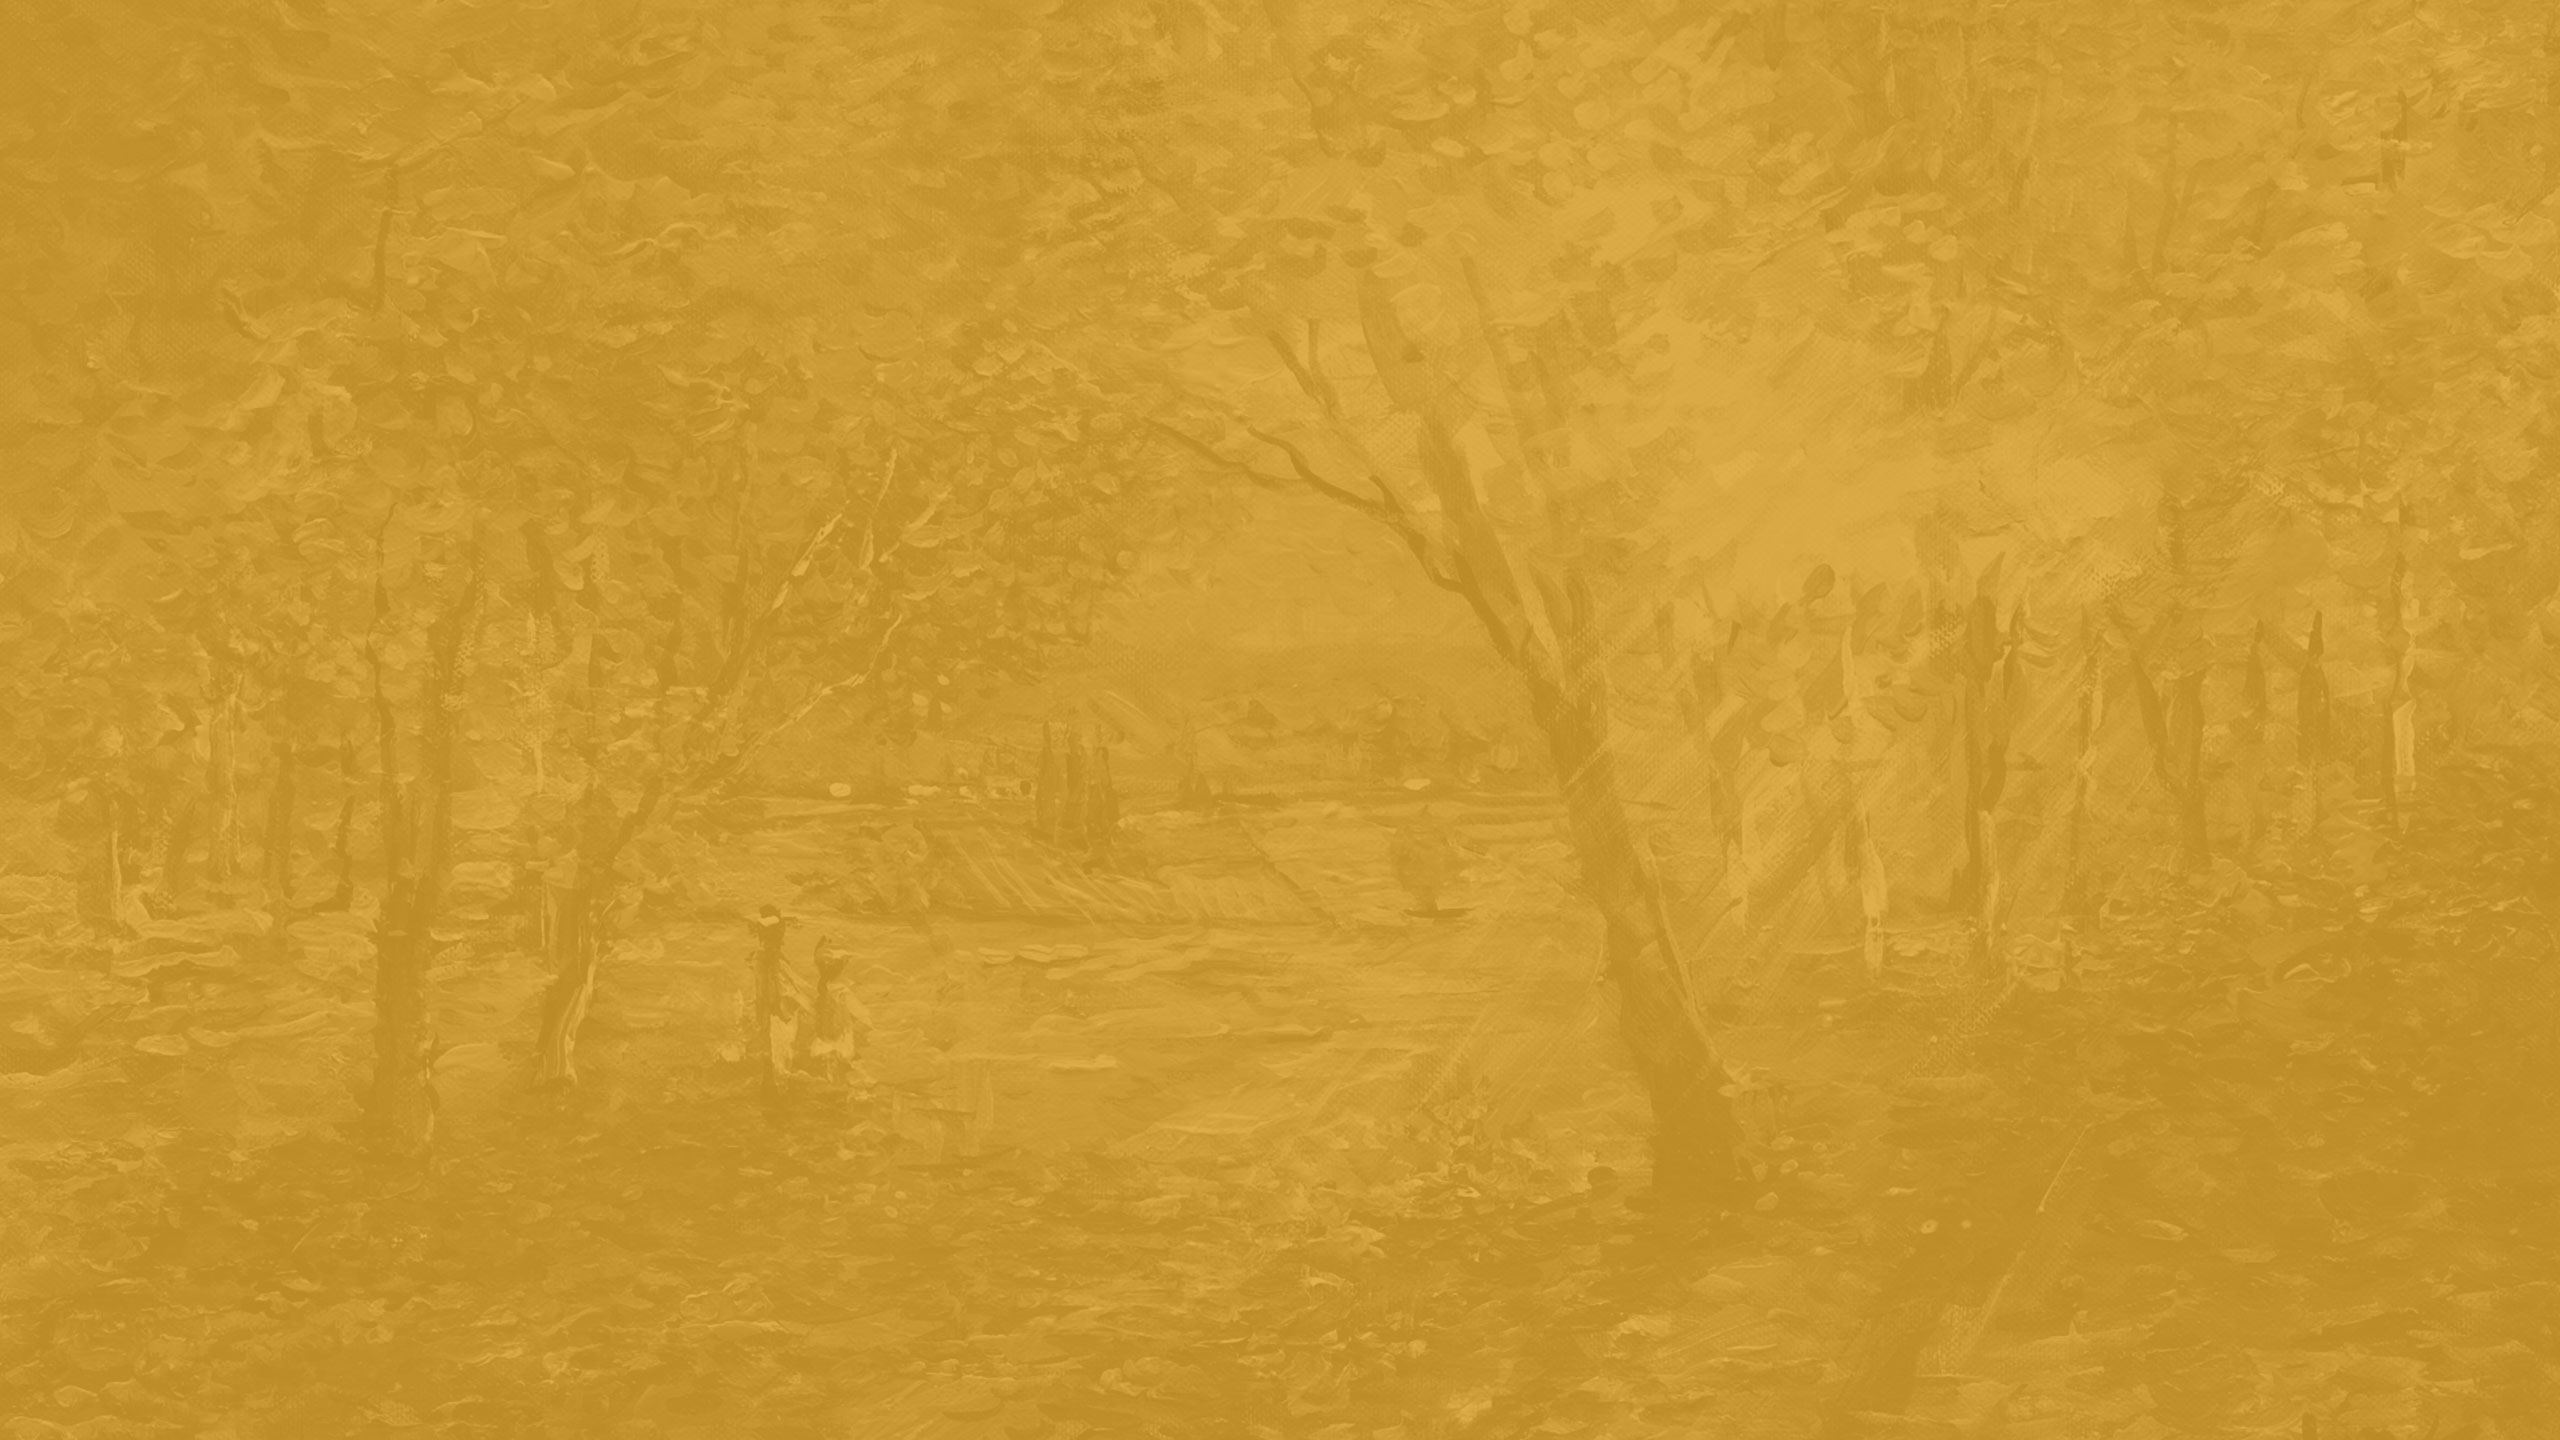 a yellow background with trees